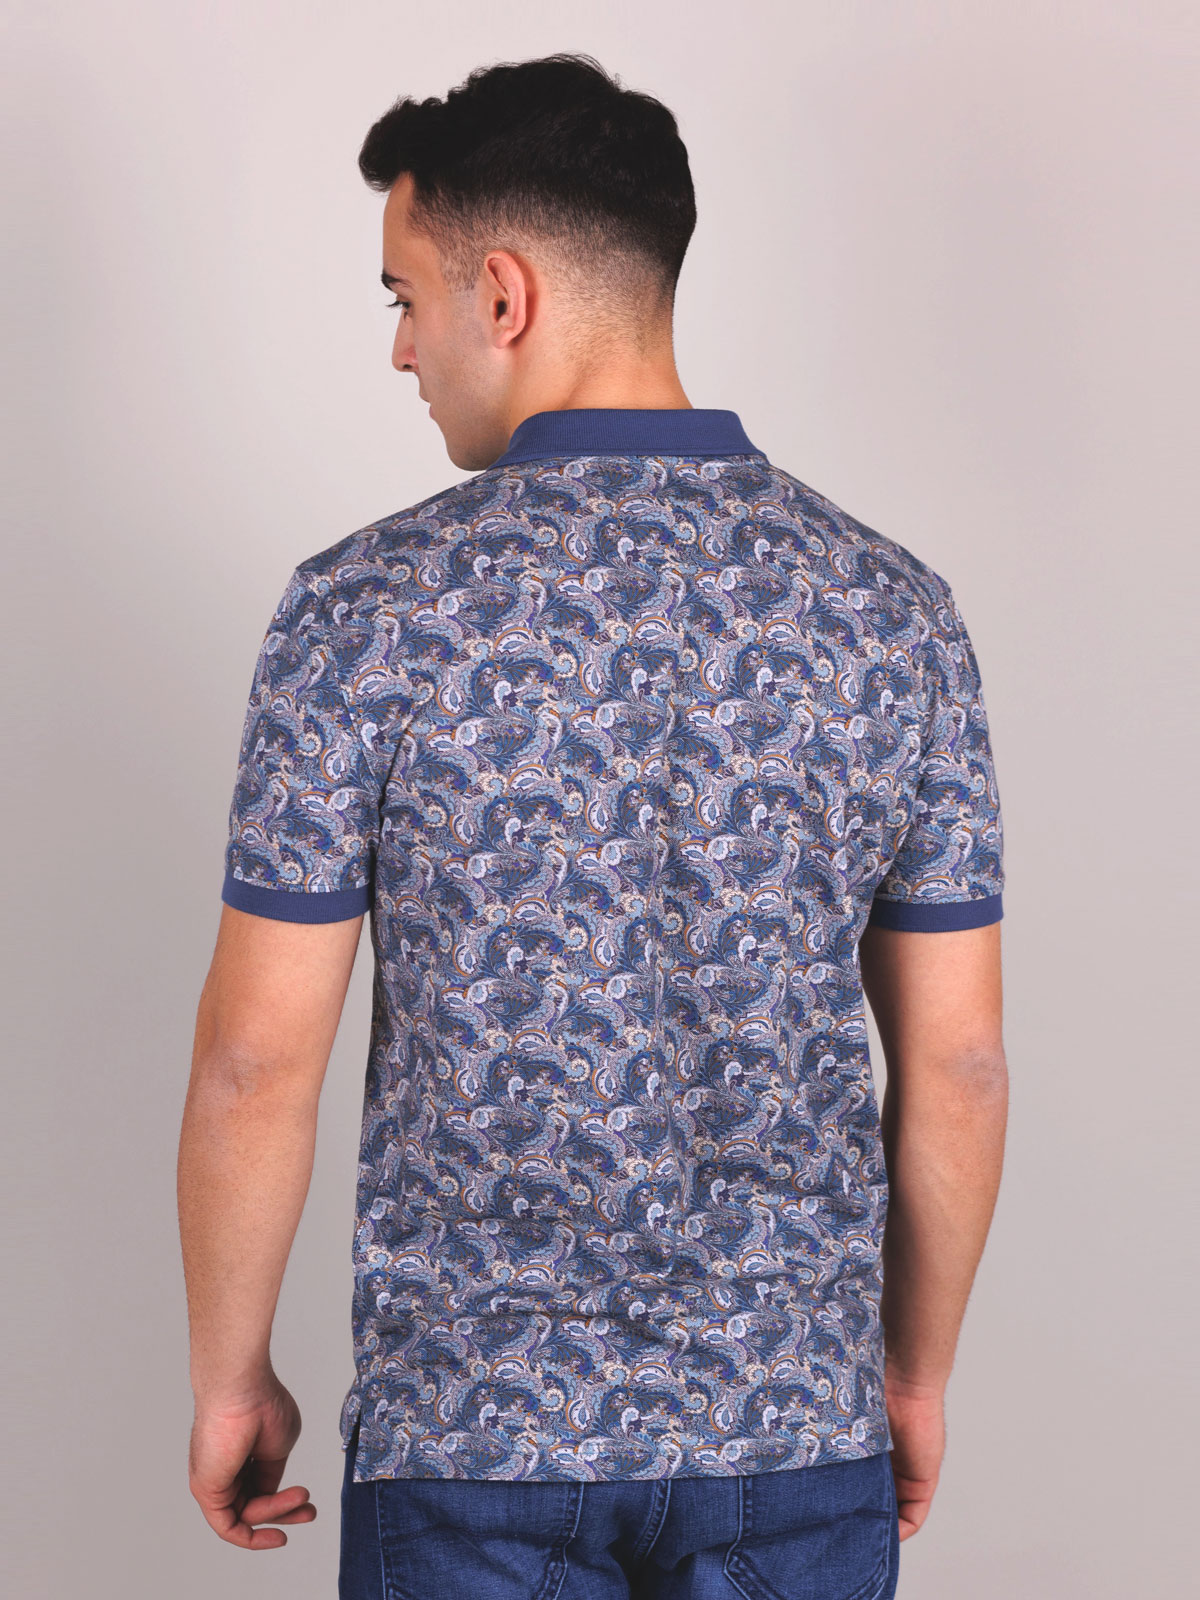 Tshirt in blue with paisley print - 93426 € 40.49 img2